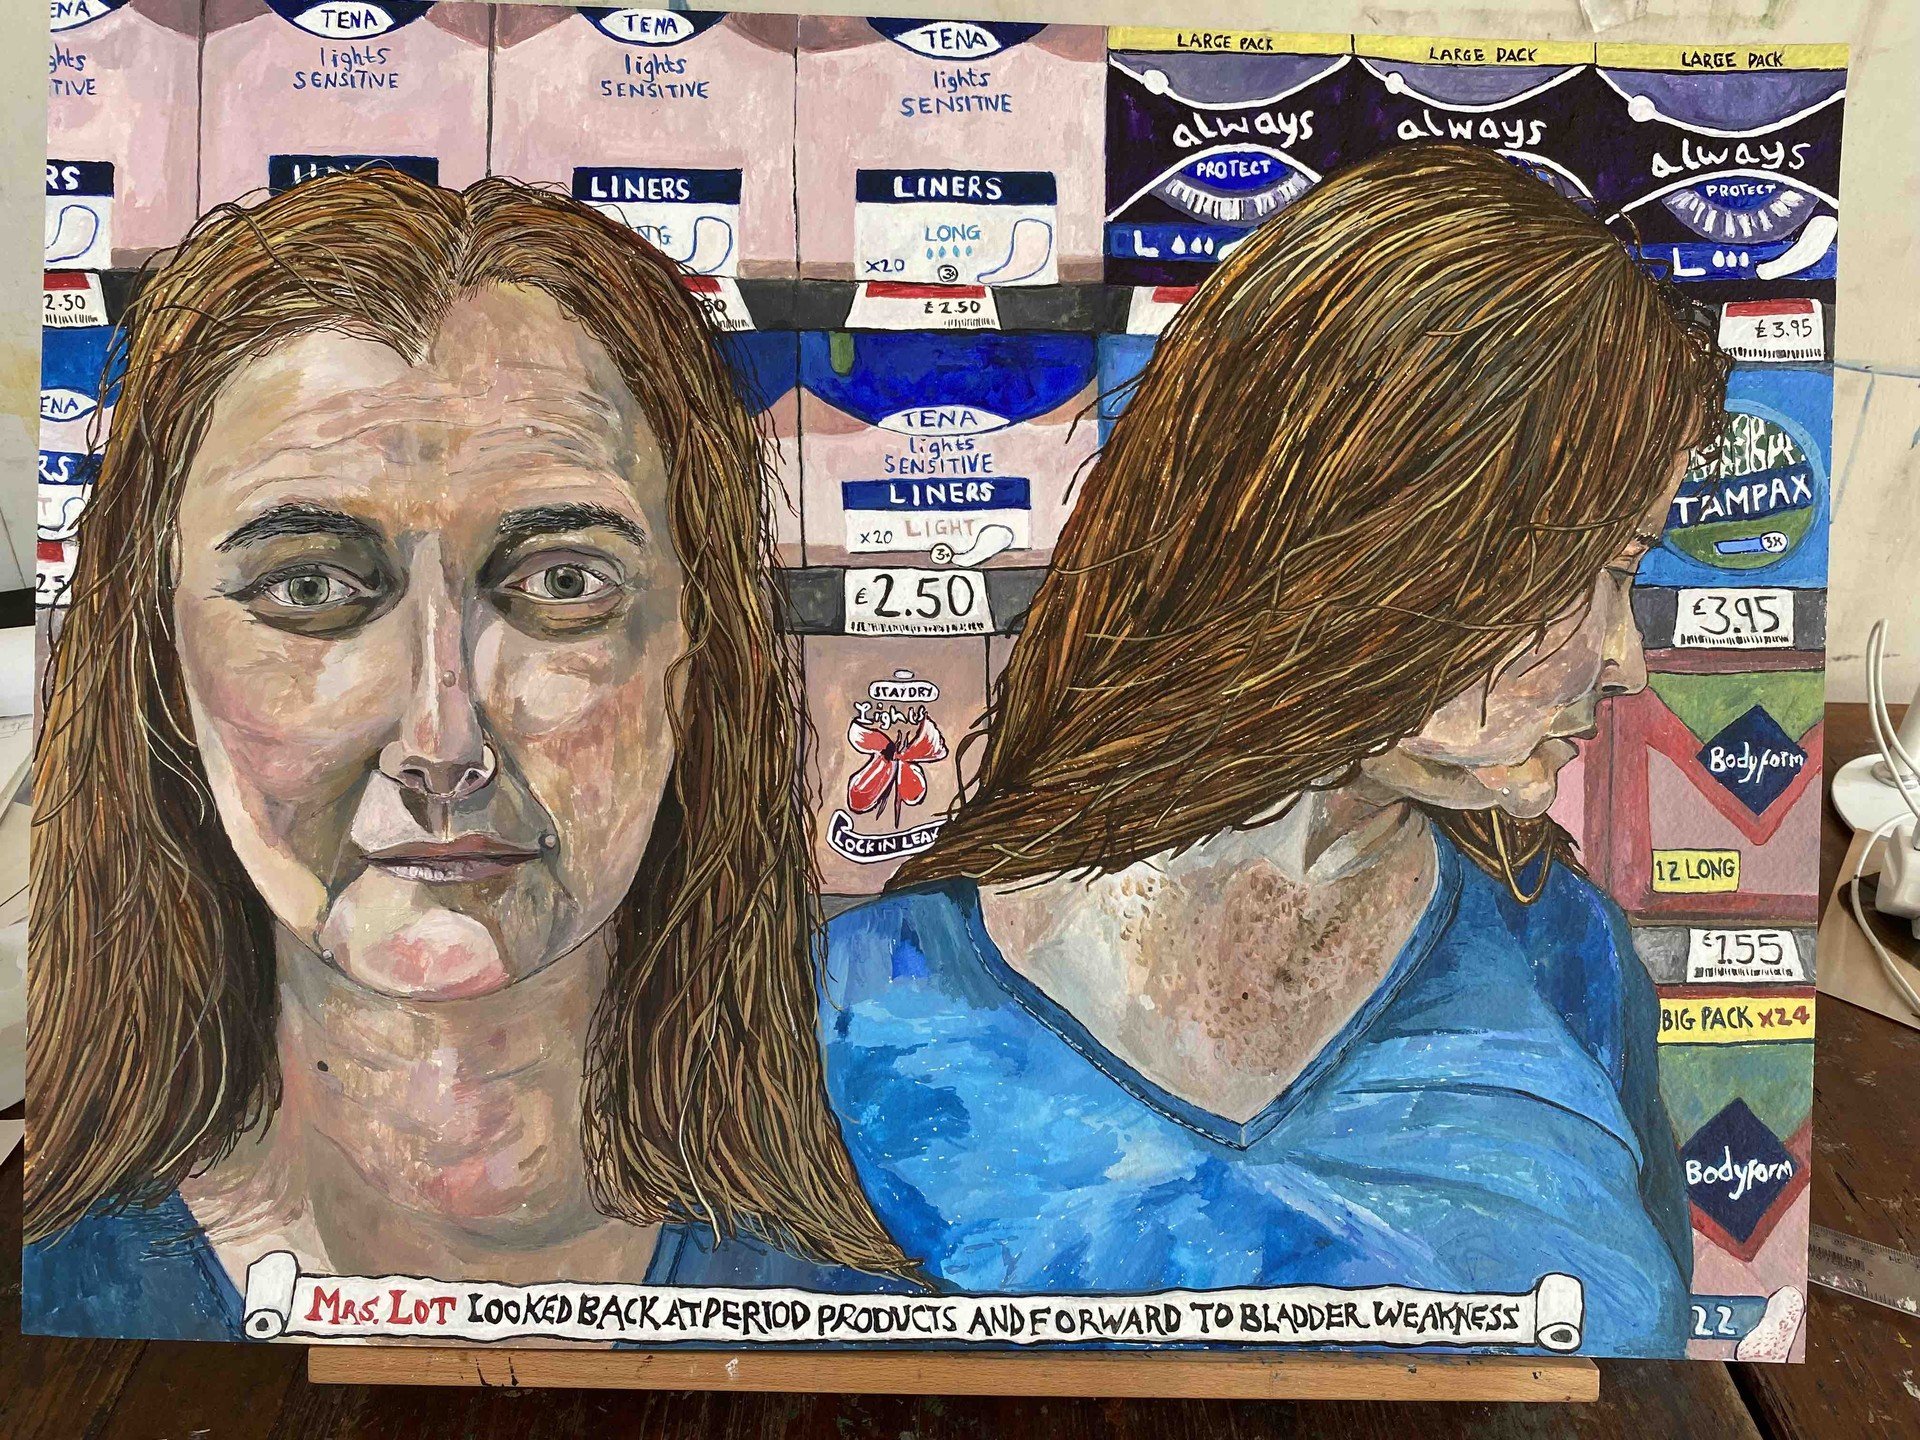 &quot;Lot's Wife&quot;(2024)
Watercolour on Paper 
61cm x 45.5cm 
&quot;Mrs Lot Looked Back at Period Products and Forward to Bladder Weakness&quot;
My largest watercolour painting to date celebrates all things damp, wet, dripping and middle-aged.
It